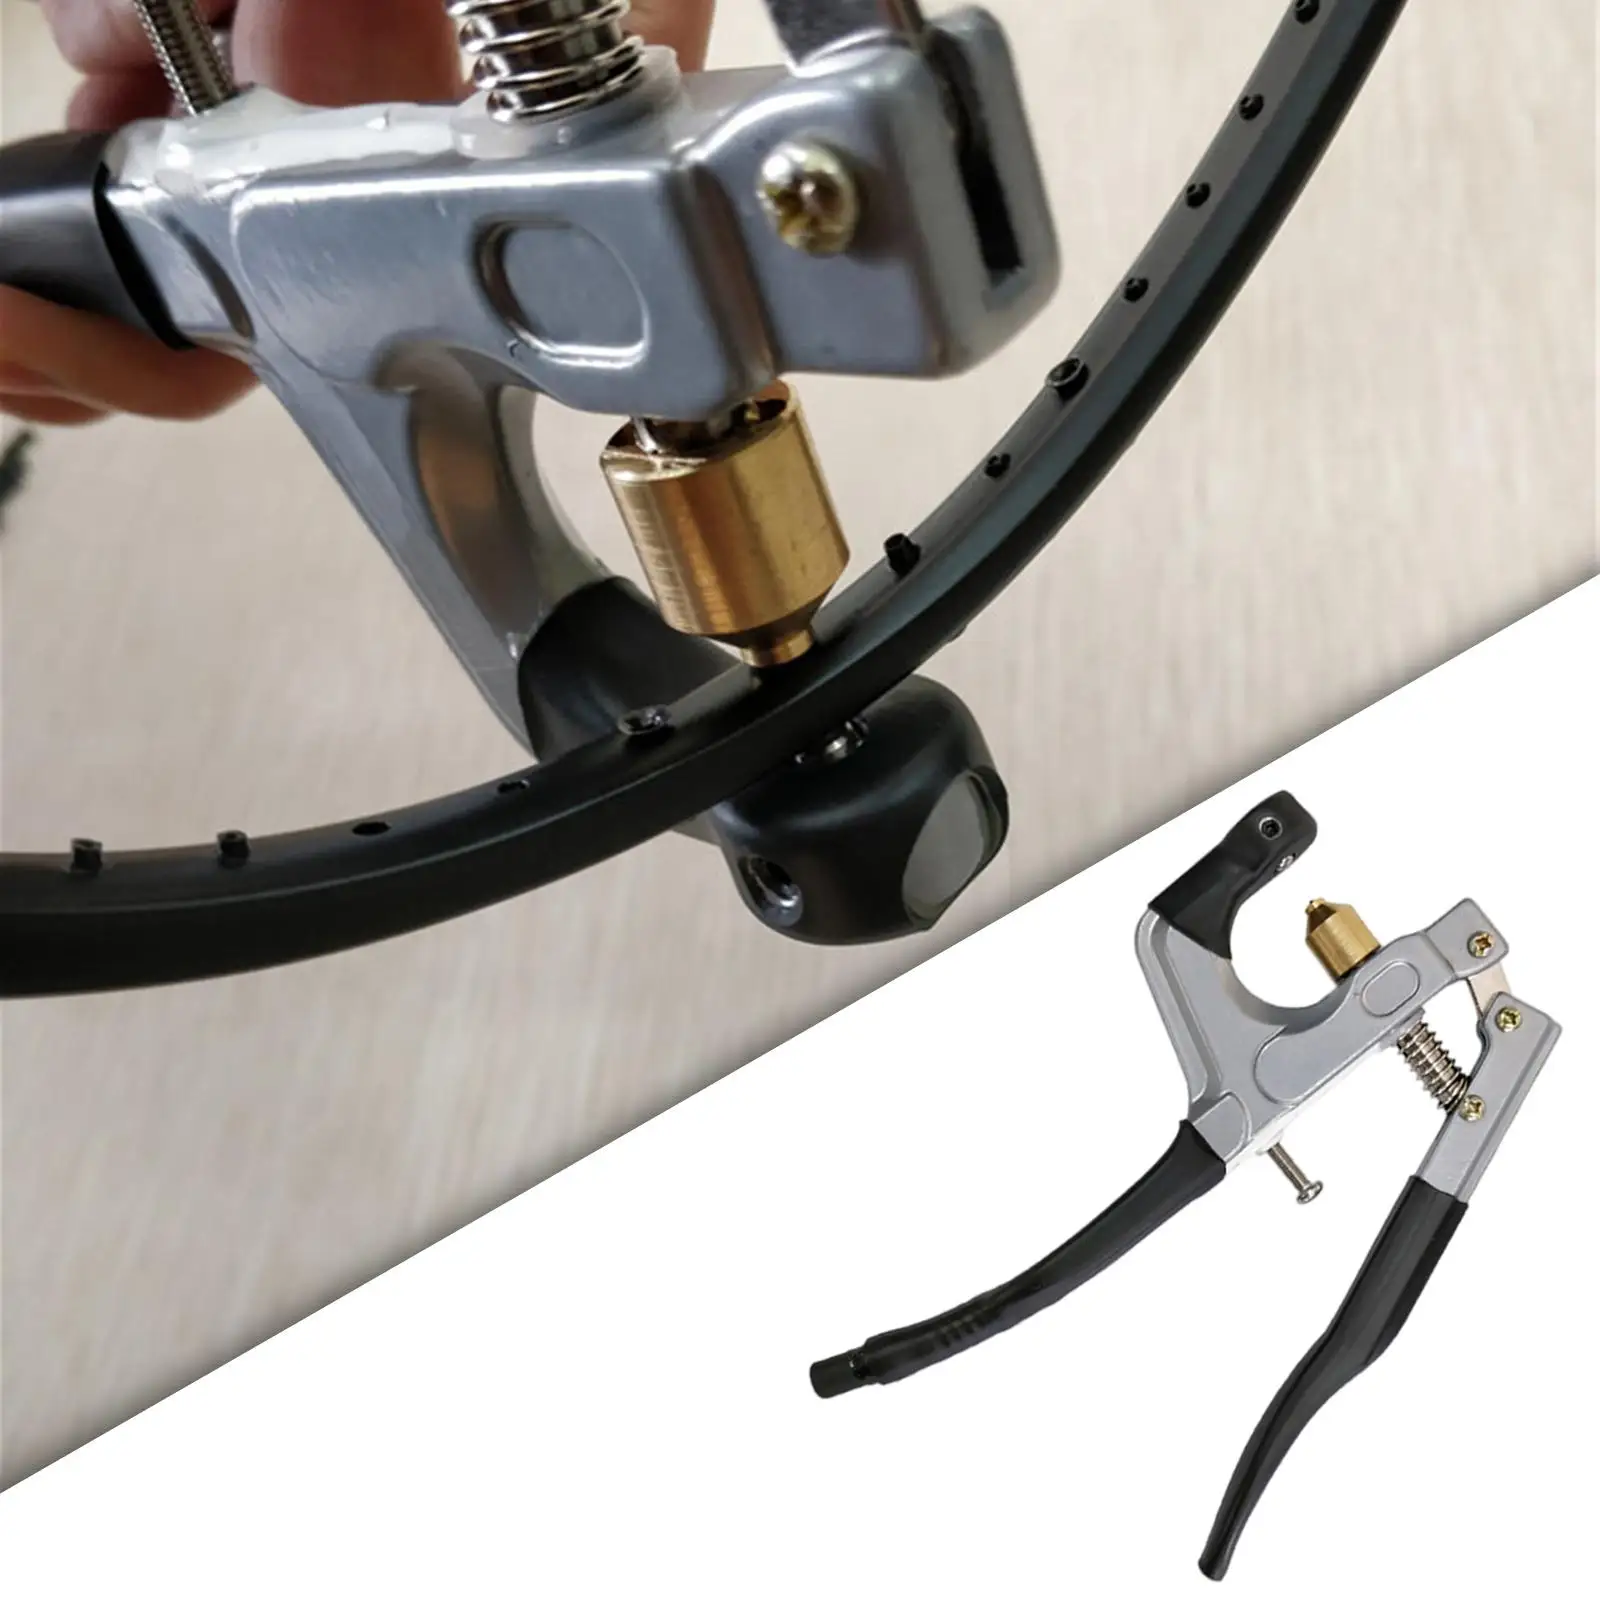 Accessory for Hot Pressure Pliers for Stringing Instruments of The